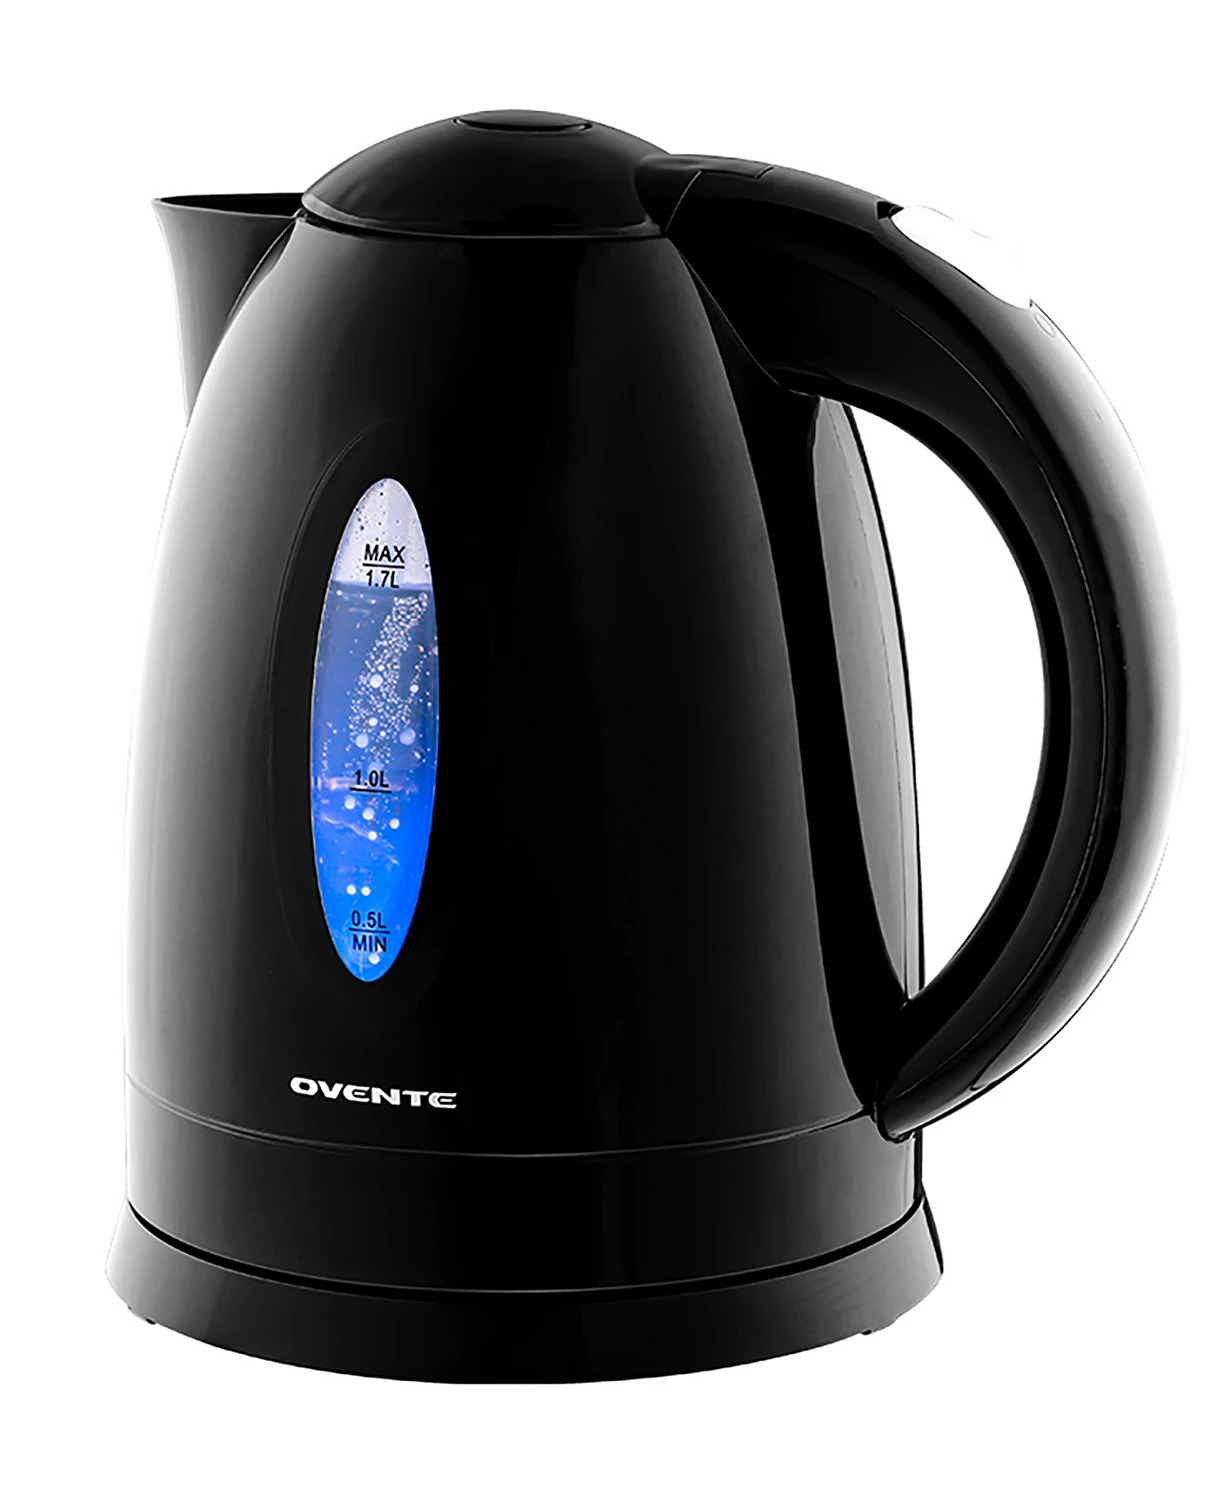 1.7Liter Ovente Electric Kettle $12 (Less w SD Cashback) + s/h at Macy's (Or Free Curbside Pick-up where Available)